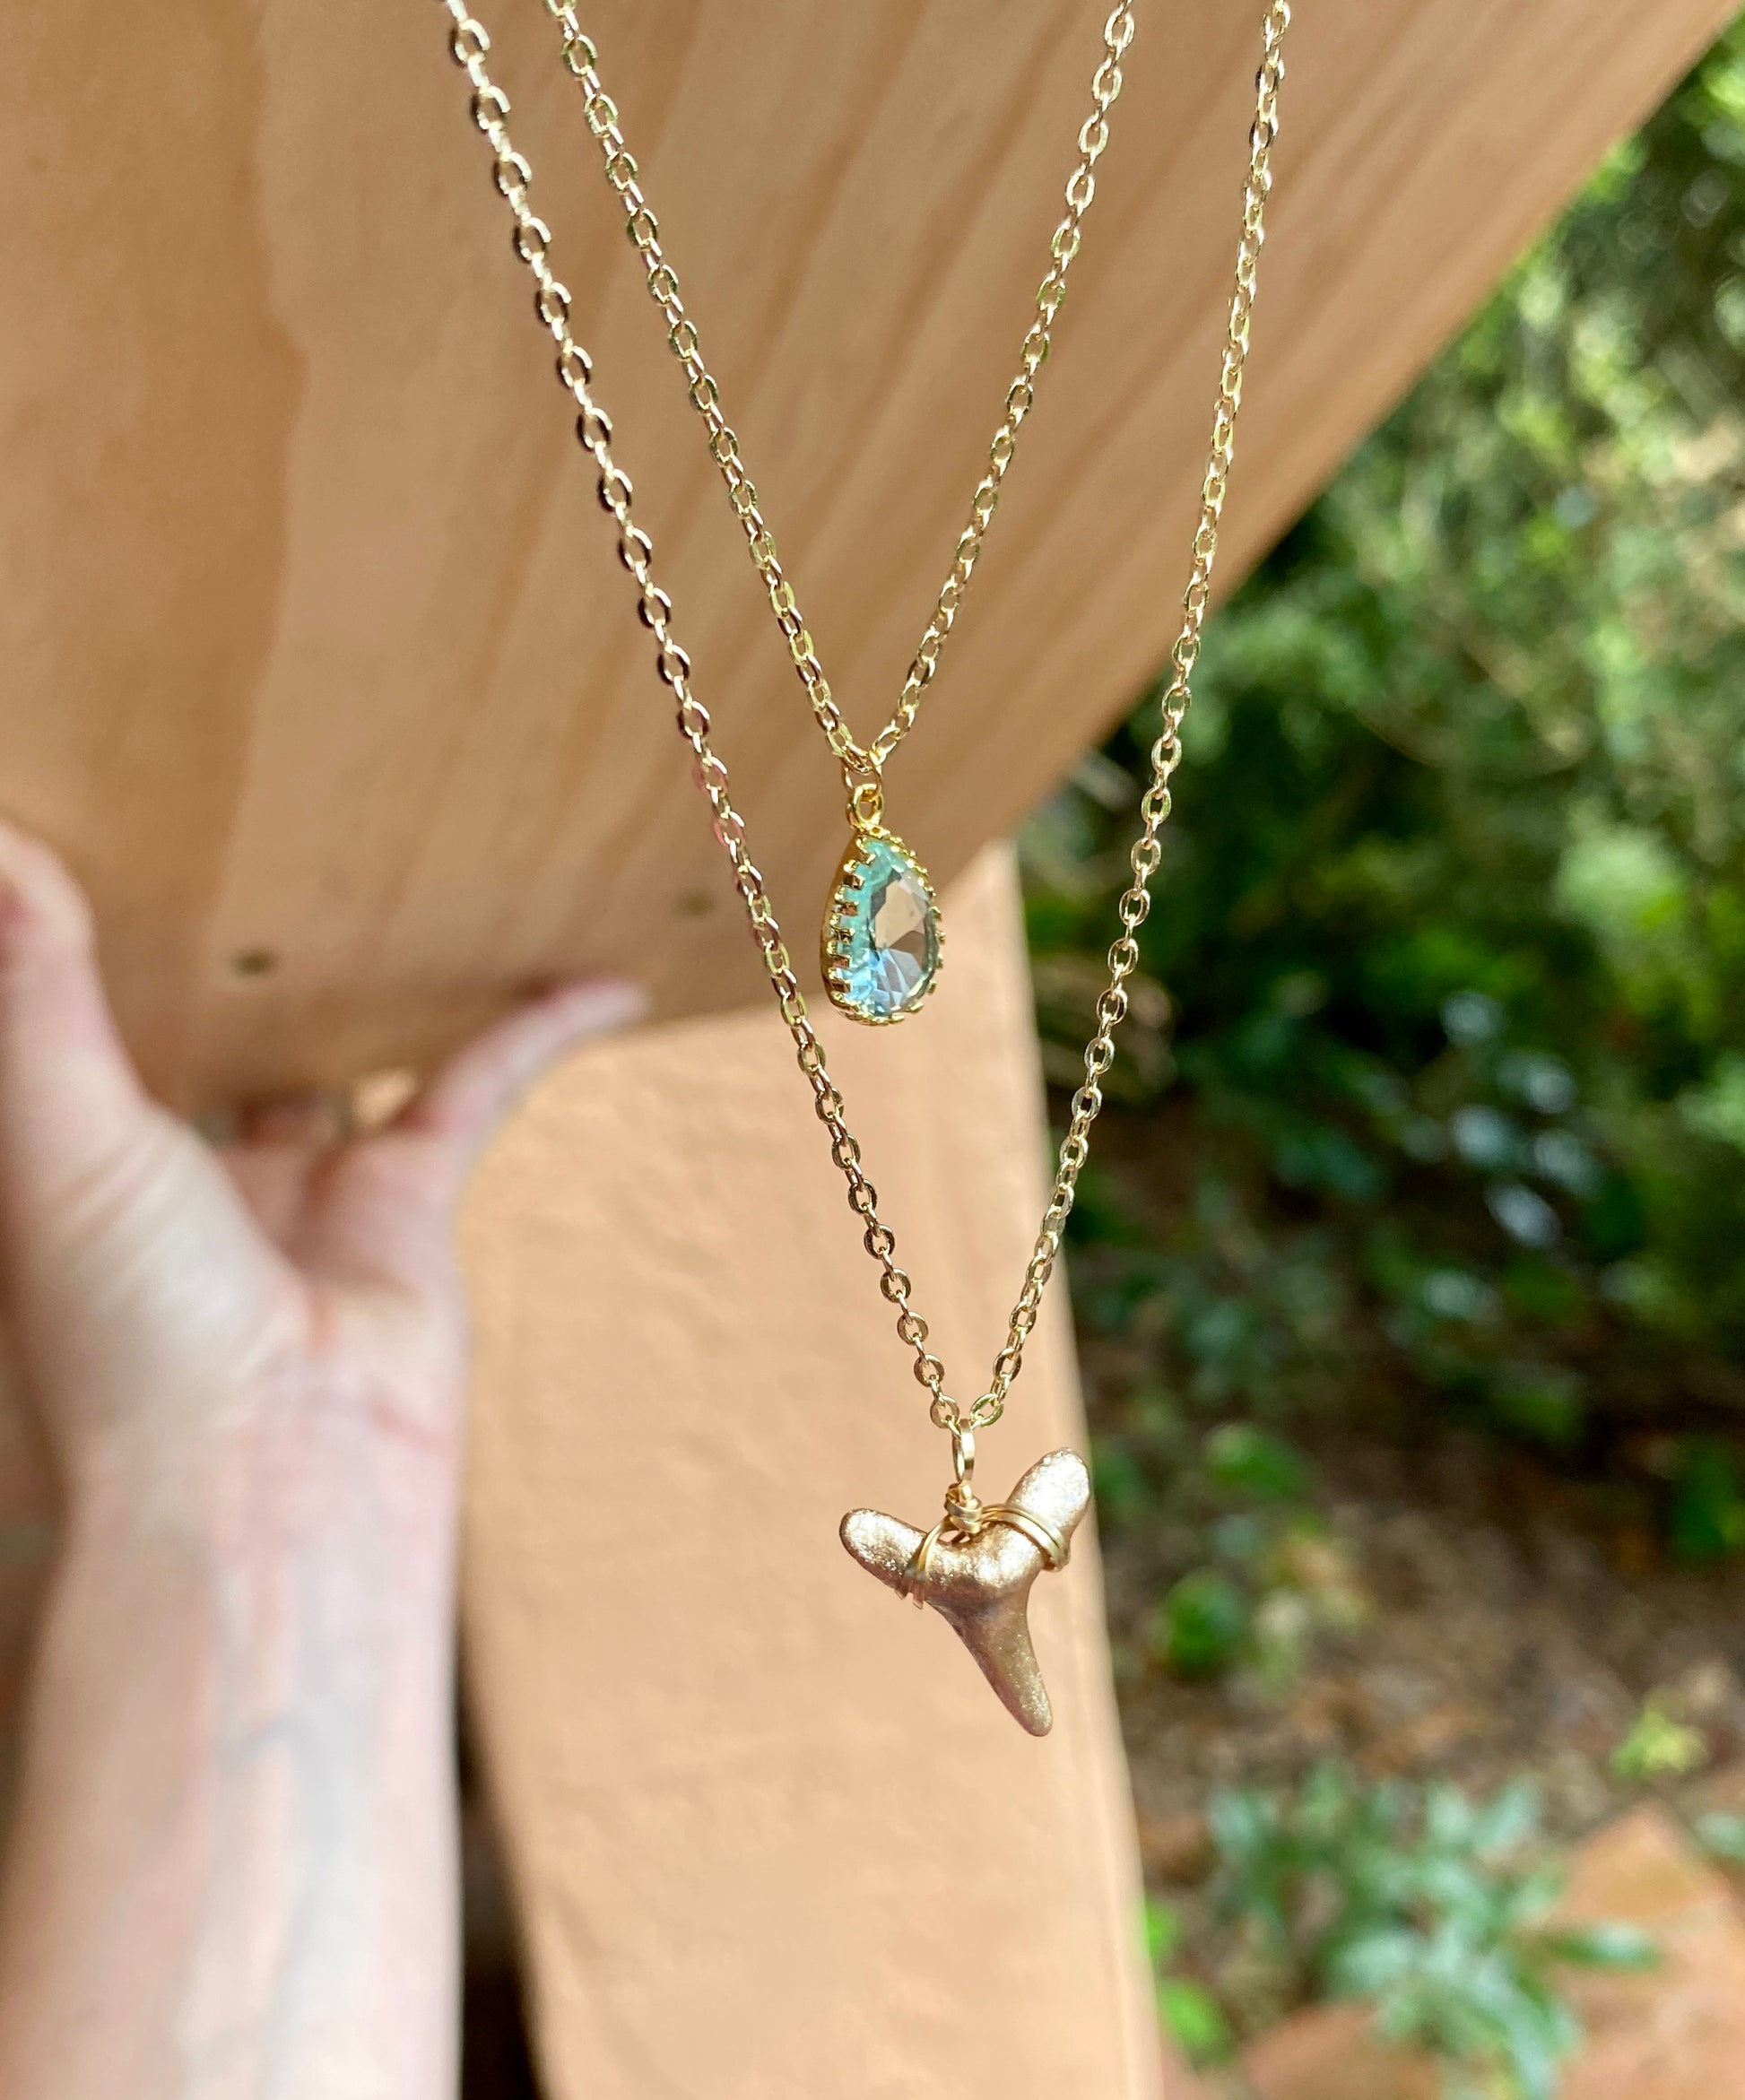 elegant gold shark tooth and stone necklace-aquamarine pendant with 14k gold filled wire wrapped shark tooth necklace-Foxy Fossils